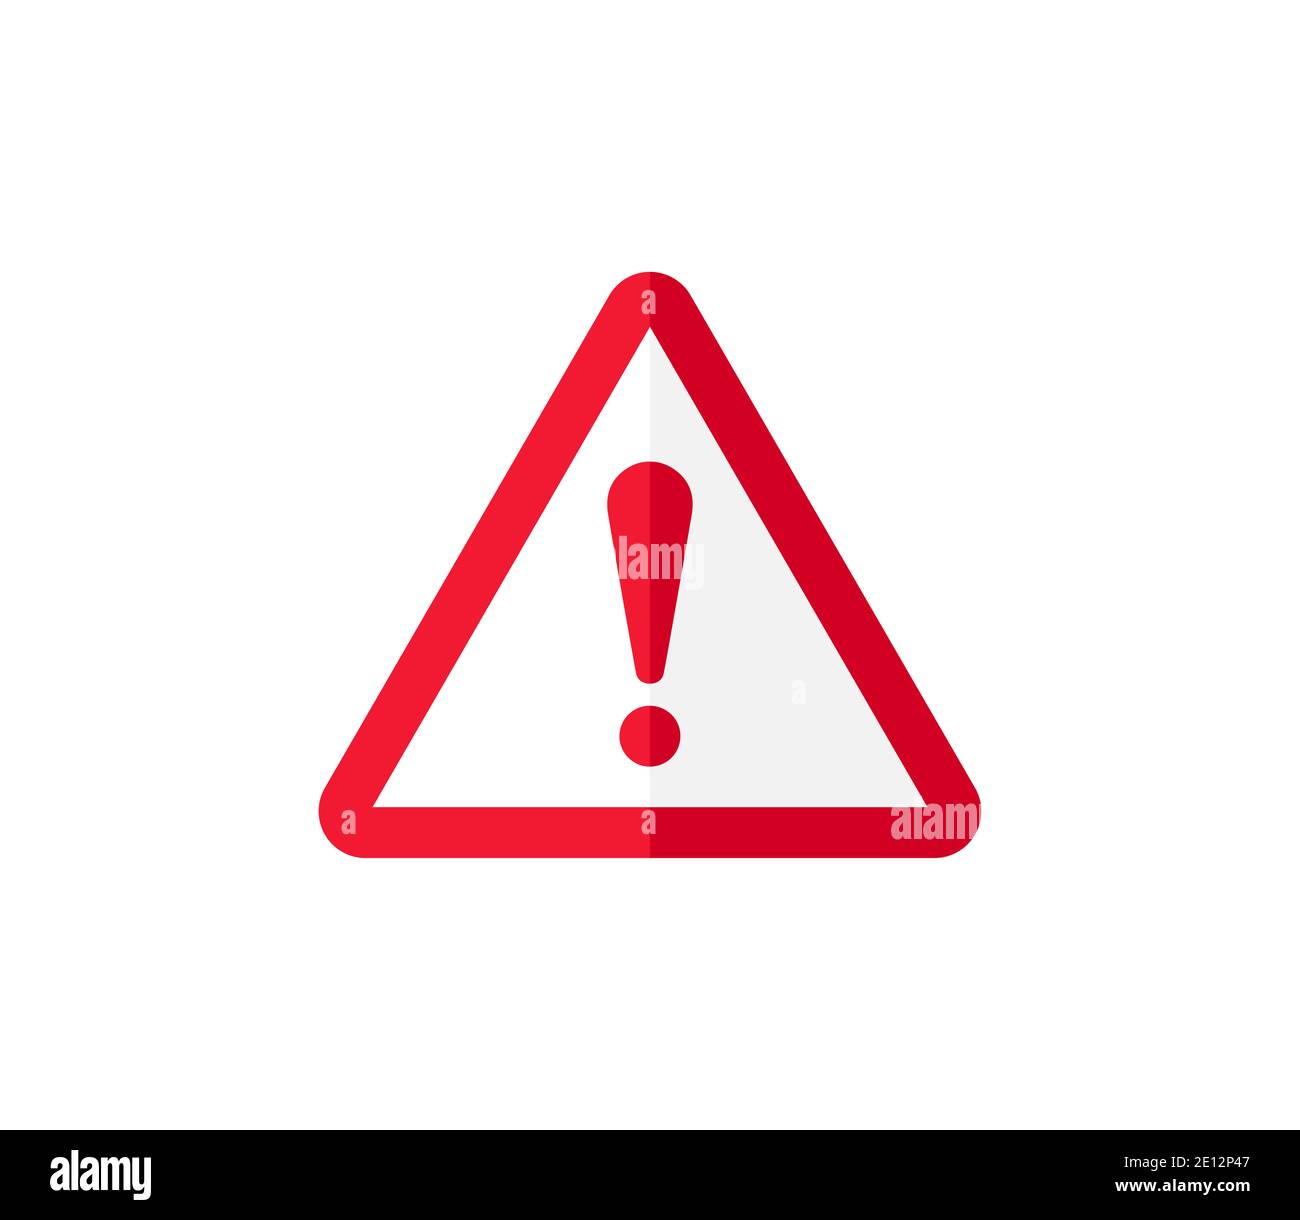 Exclamation mark road sign Cut Out Stock Images & Pictures - Alamy